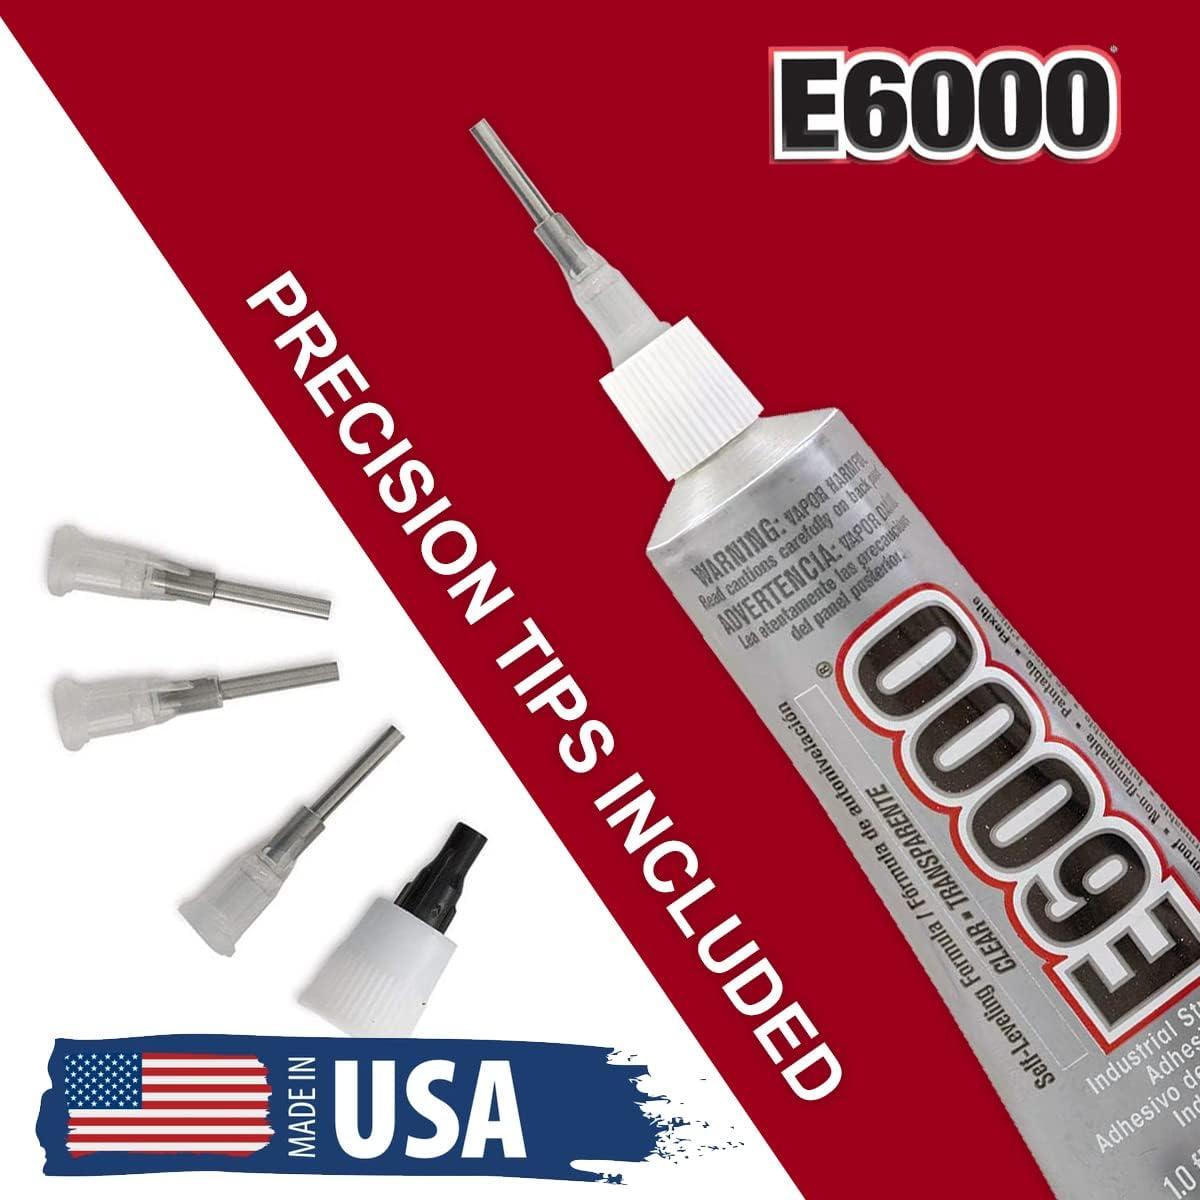 E6000 1-Ounce Tube with Precision Tips Industrial Strength Adhesive for  Crafting and Pixiss Wooden Art Dotting Stylus Pens 5 pcs Set - Rhinestone  Applicator Kit : : Home